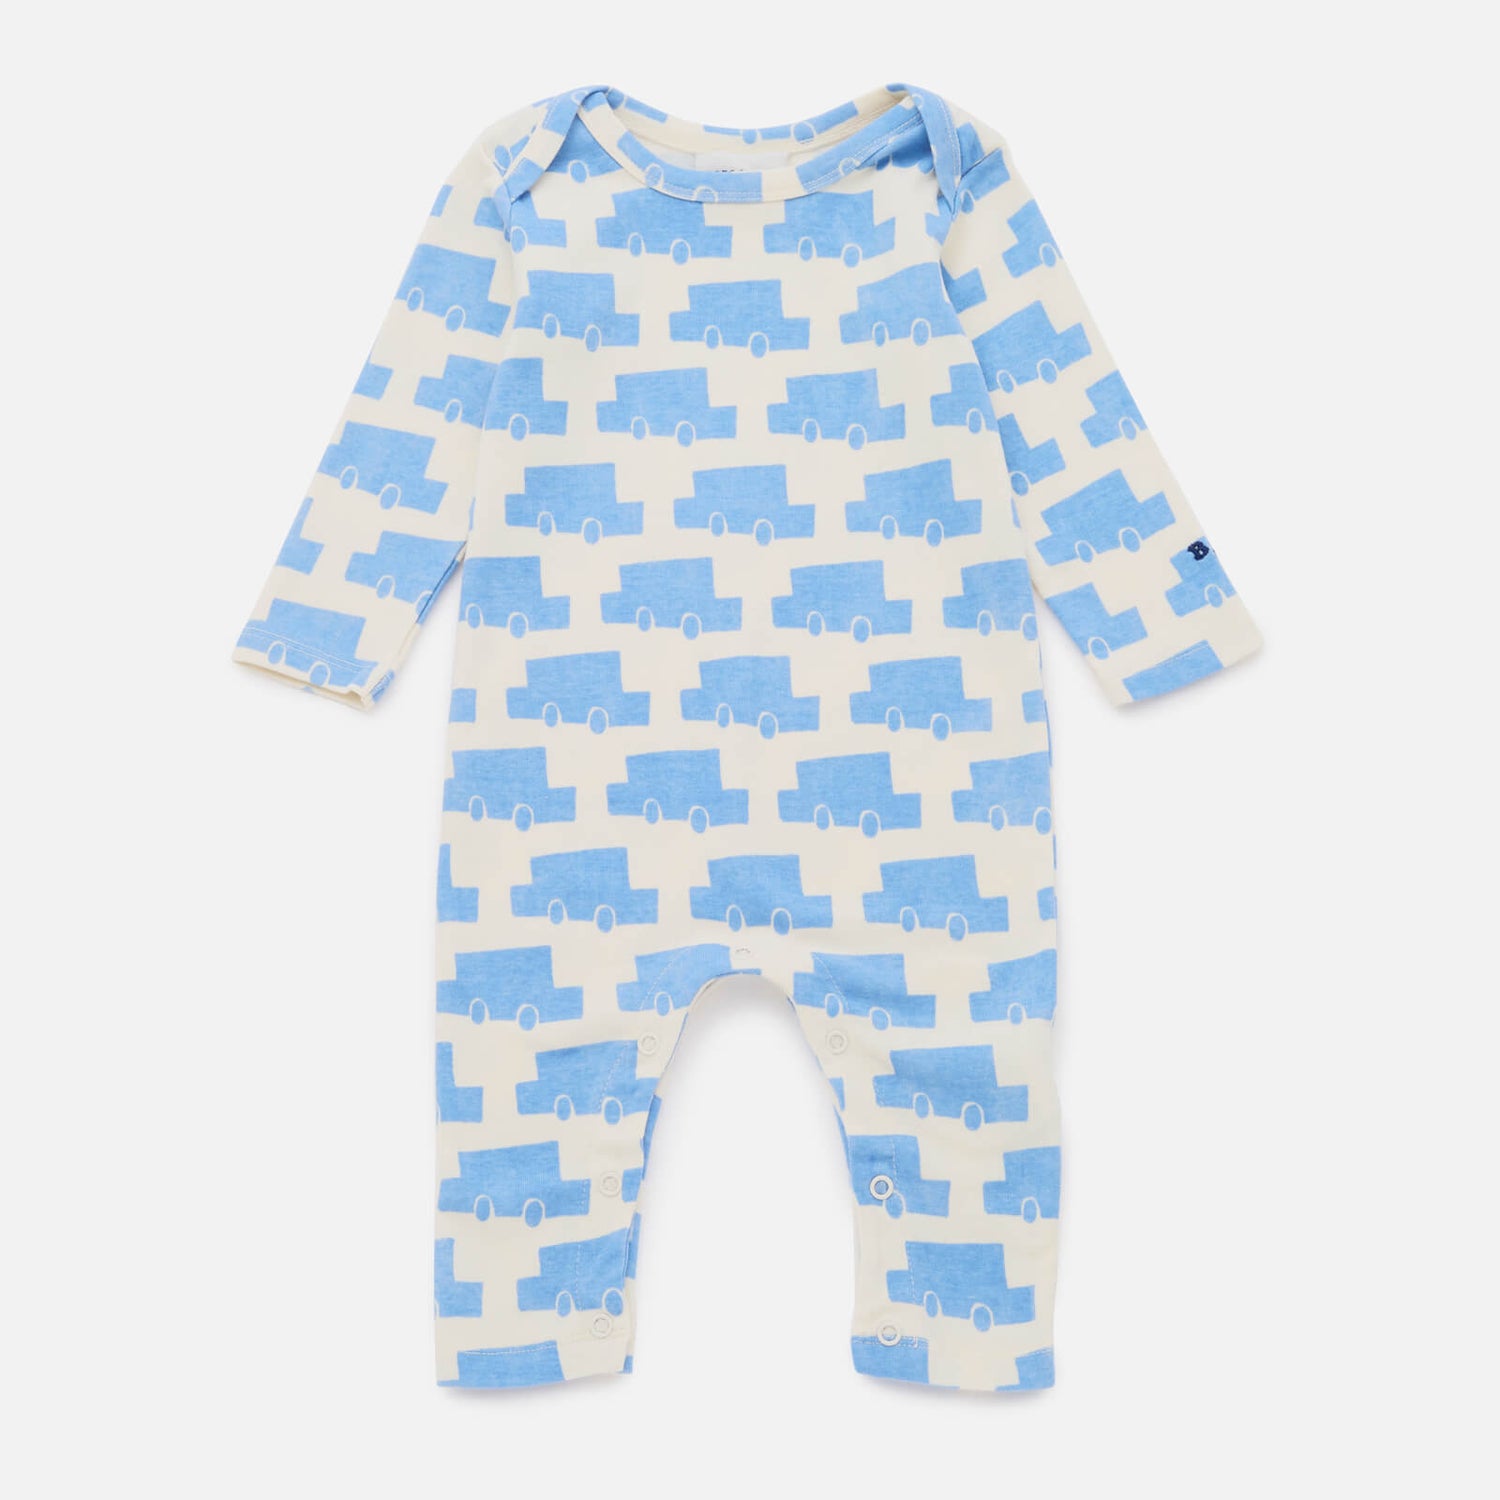 BoBo Choses Baby's Printed Cotton-Blend Jersey Babygrow